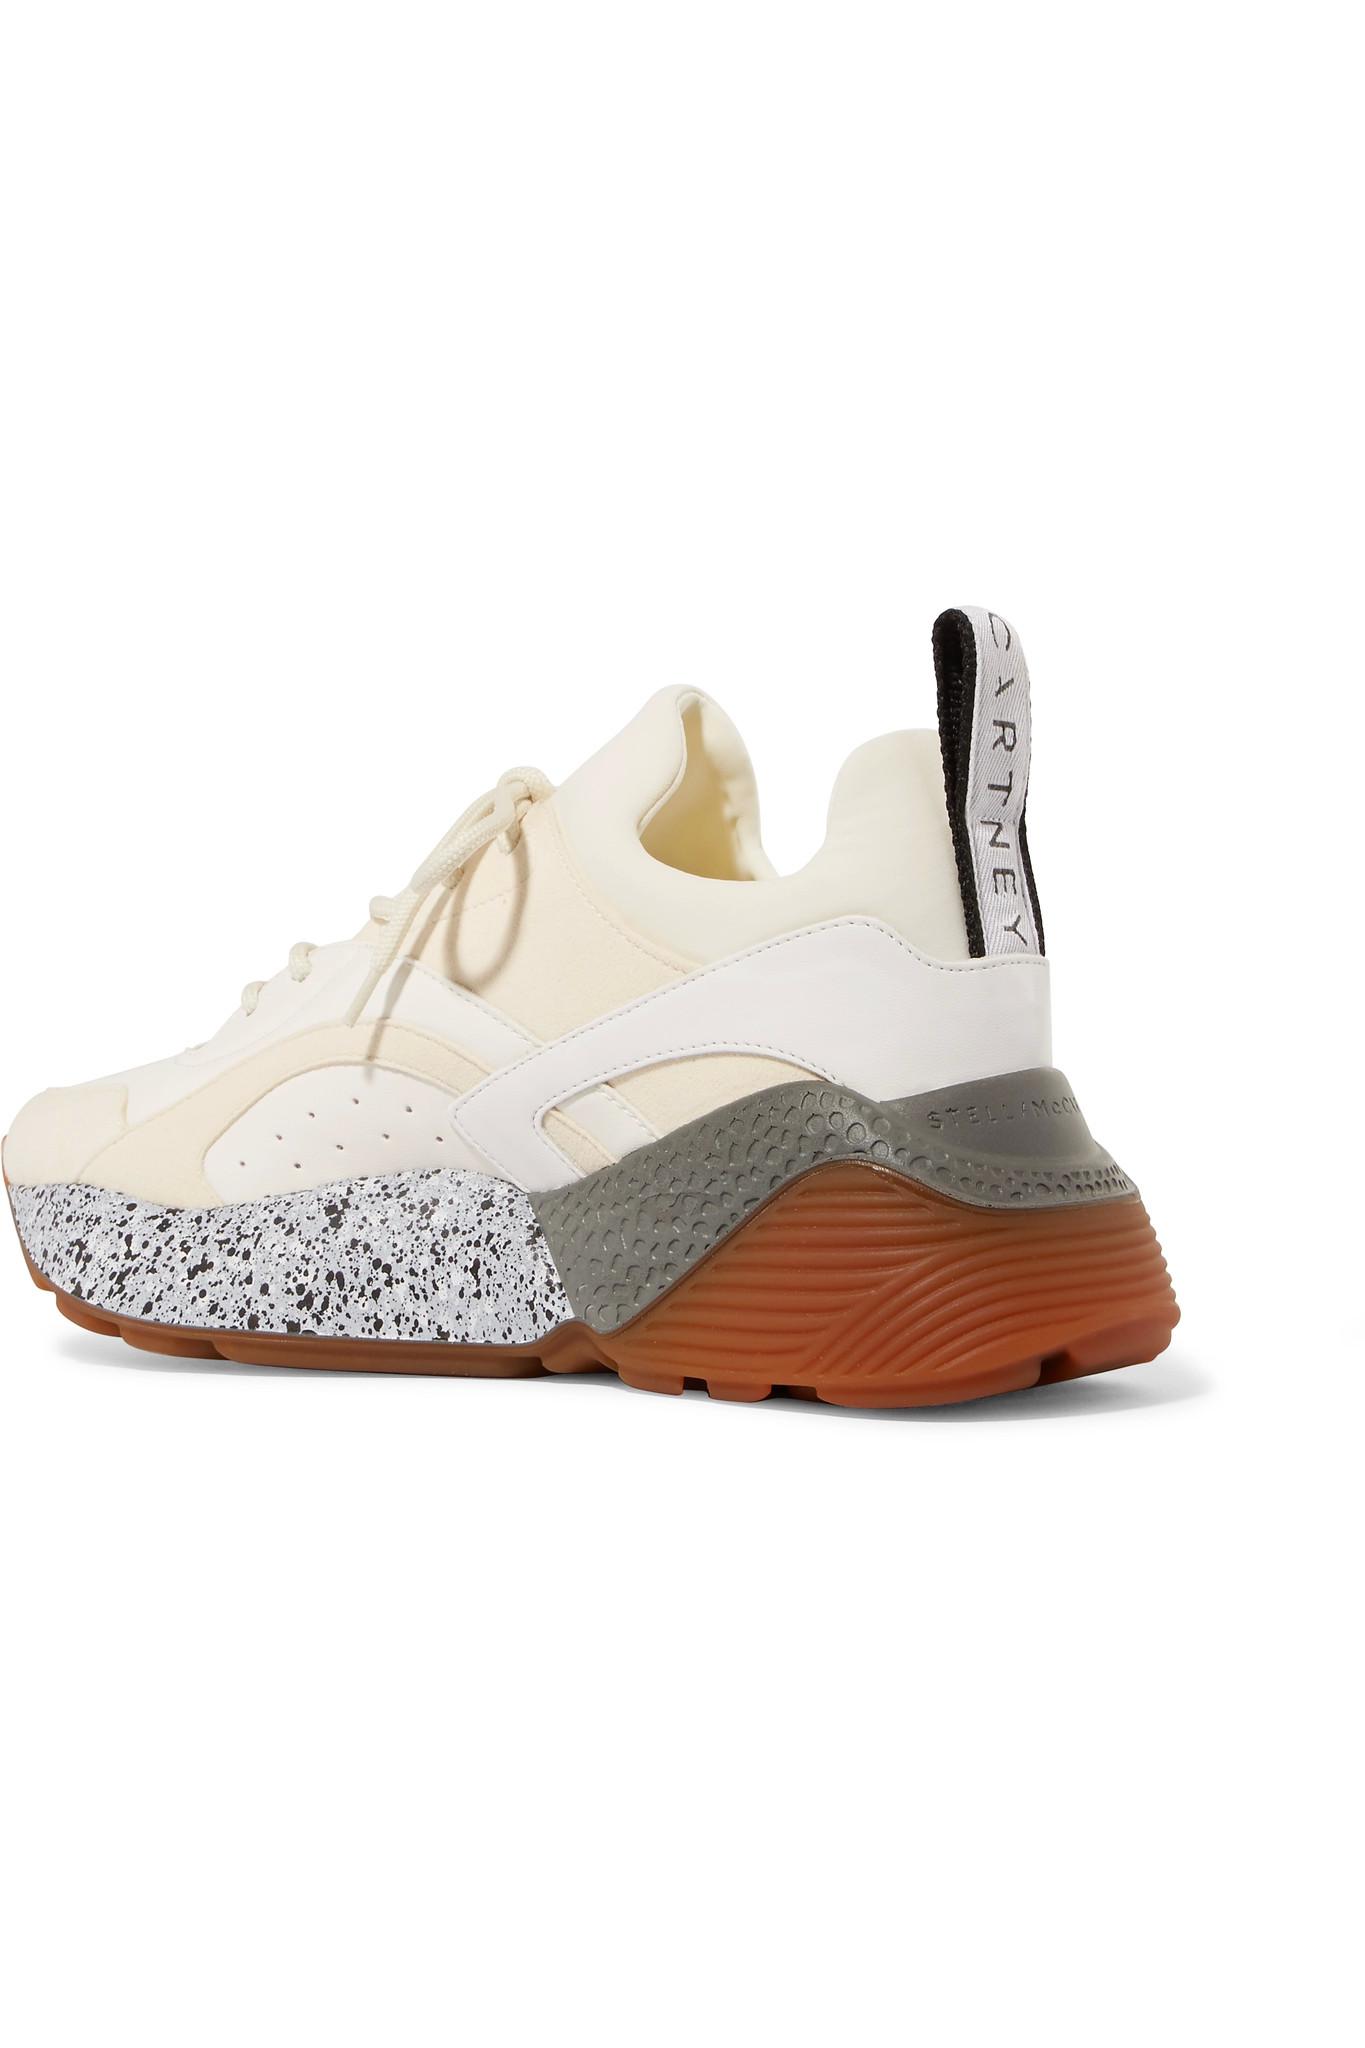 Stella McCartney Eclypse Faux Leather And Suede Sneakers in White | Lyst